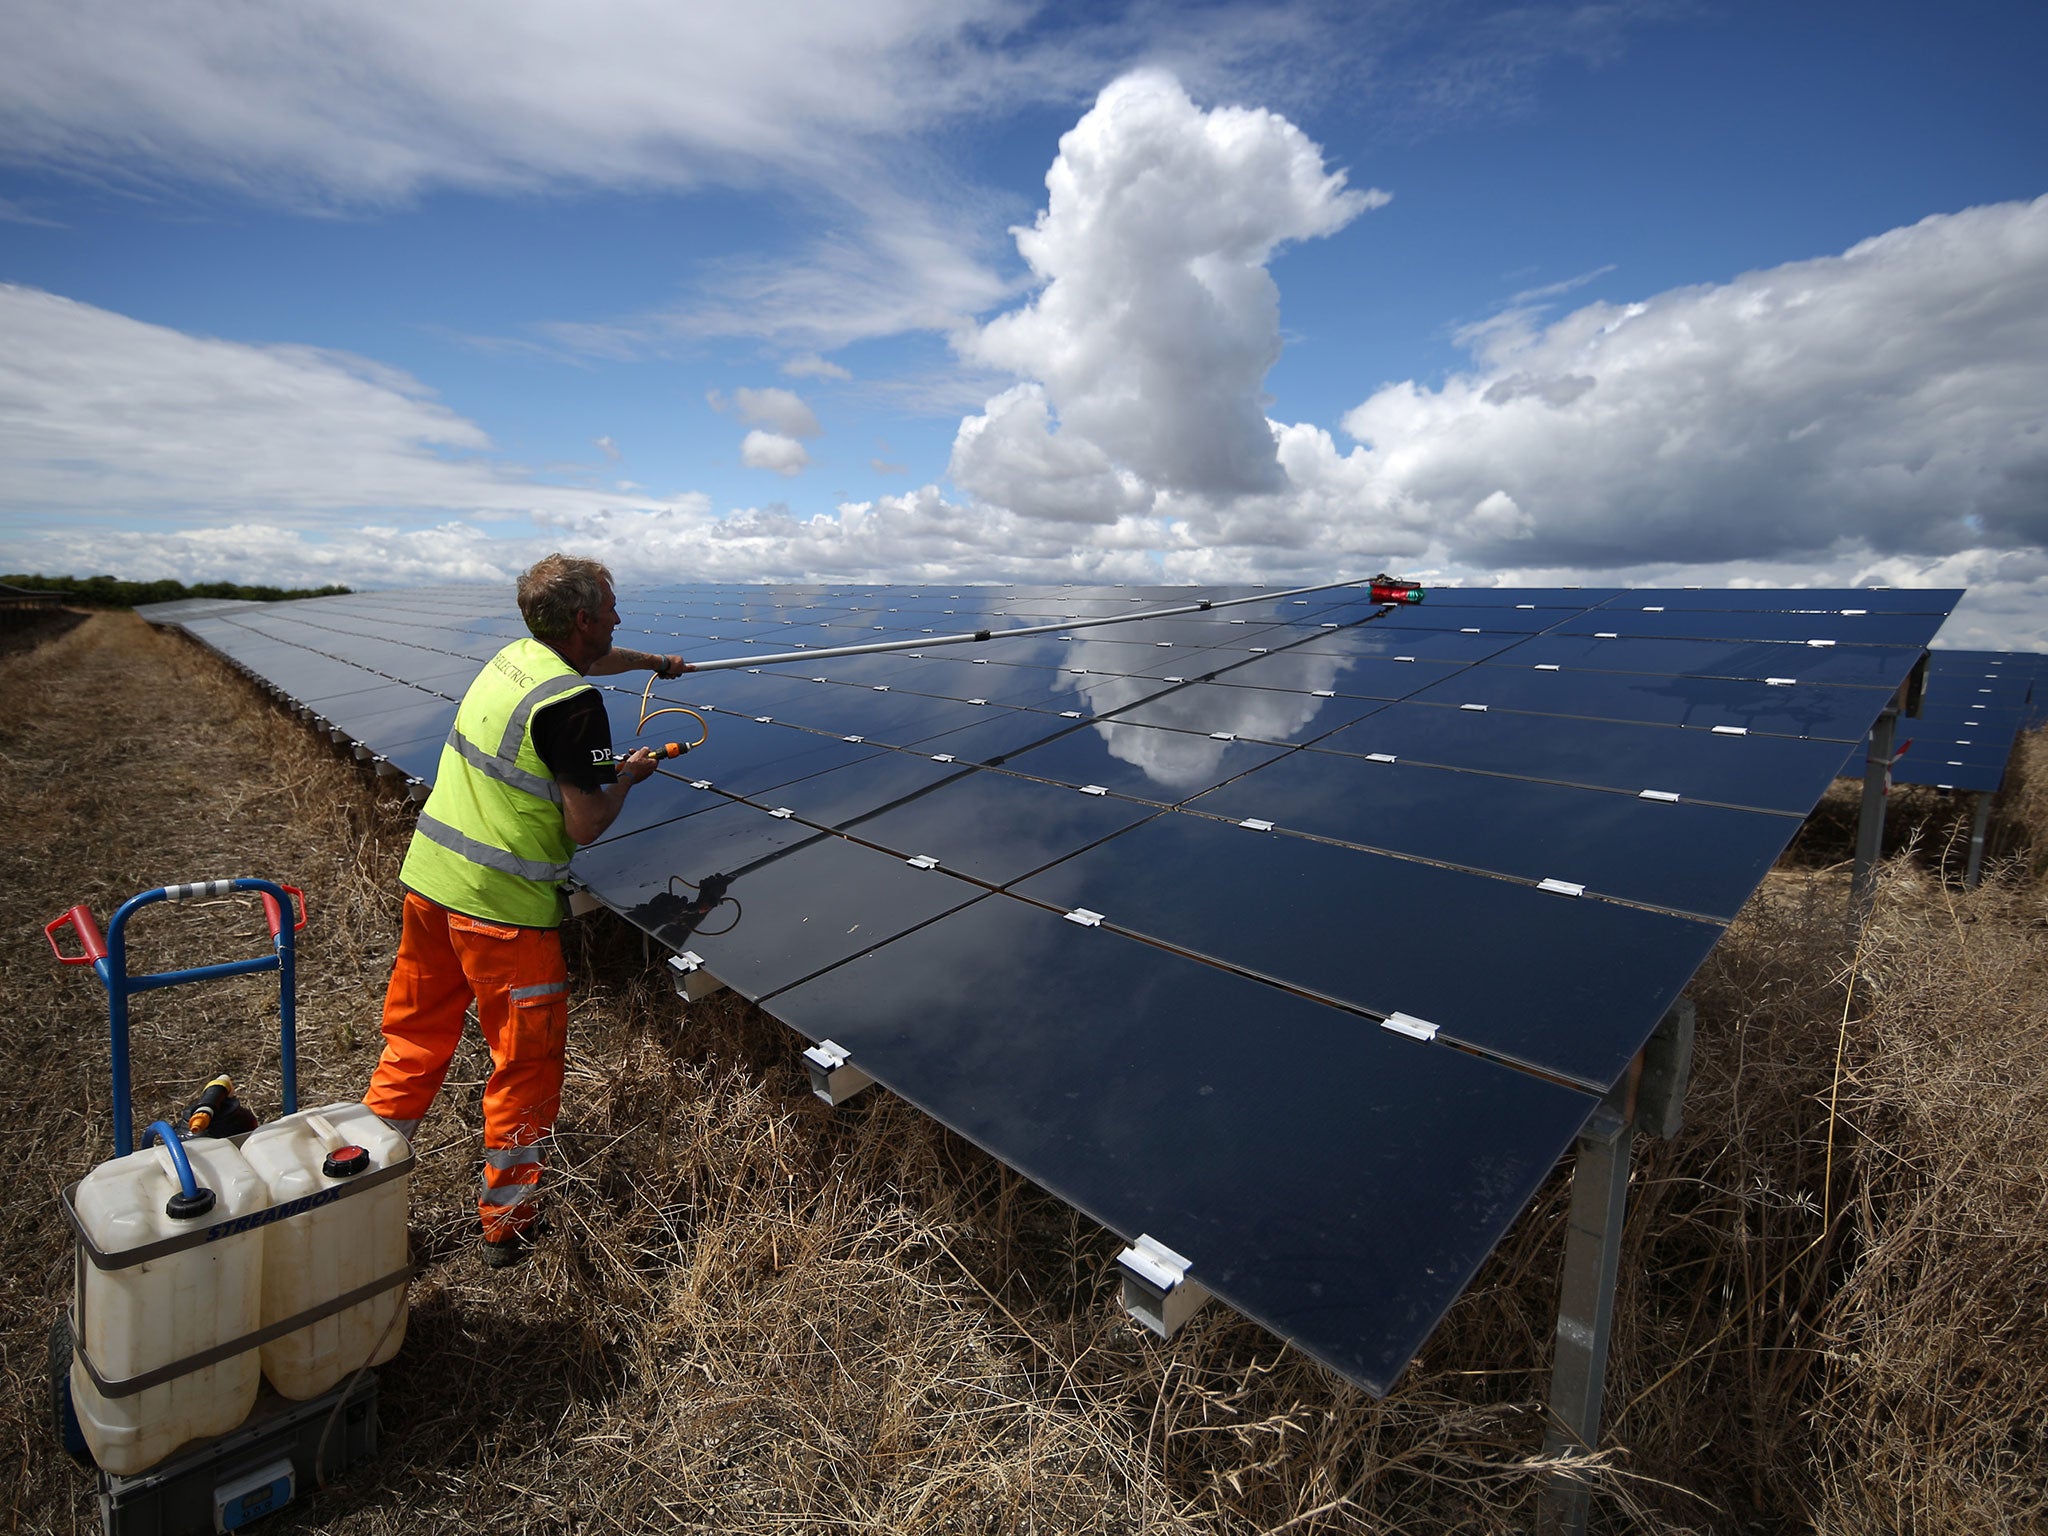 The Government cut its support for household solar panels by 65 per cent